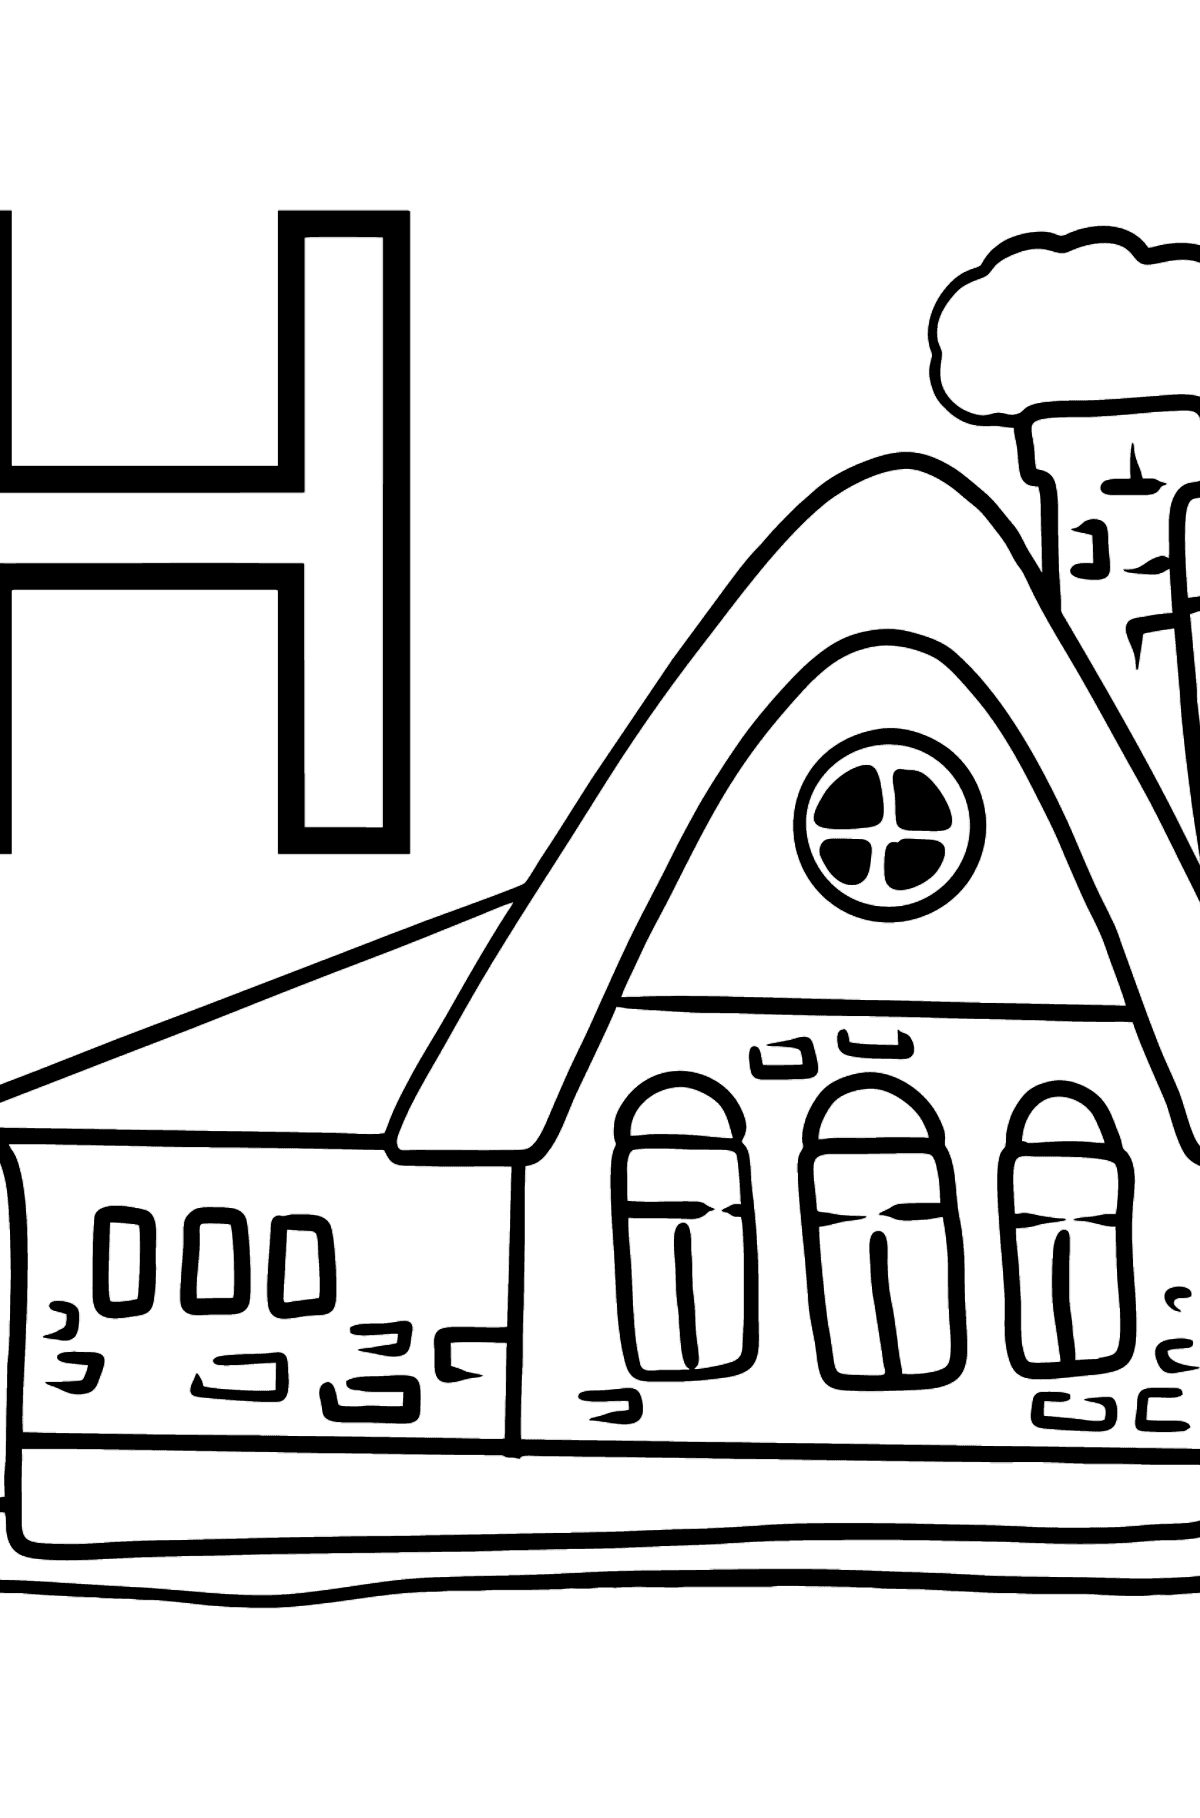 German Letter H coloring pages - HAUS - Coloring Pages for Kids